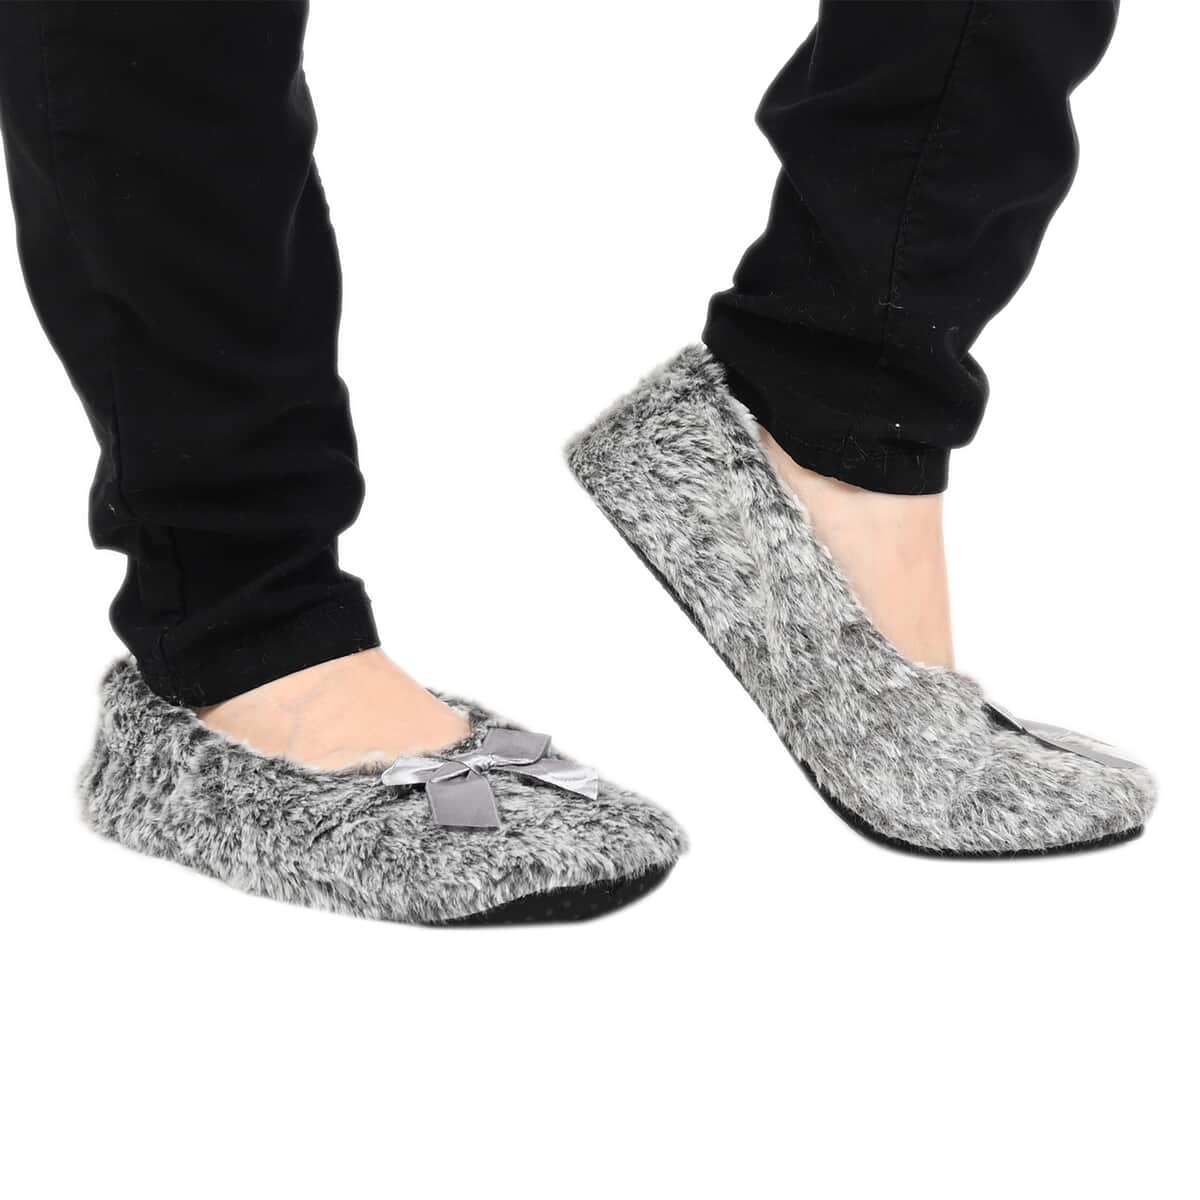 Set of 2 Pairs Grey Faux Fur Sherpa Home Bootie and Home Shoes (2.54"x7.08") image number 5